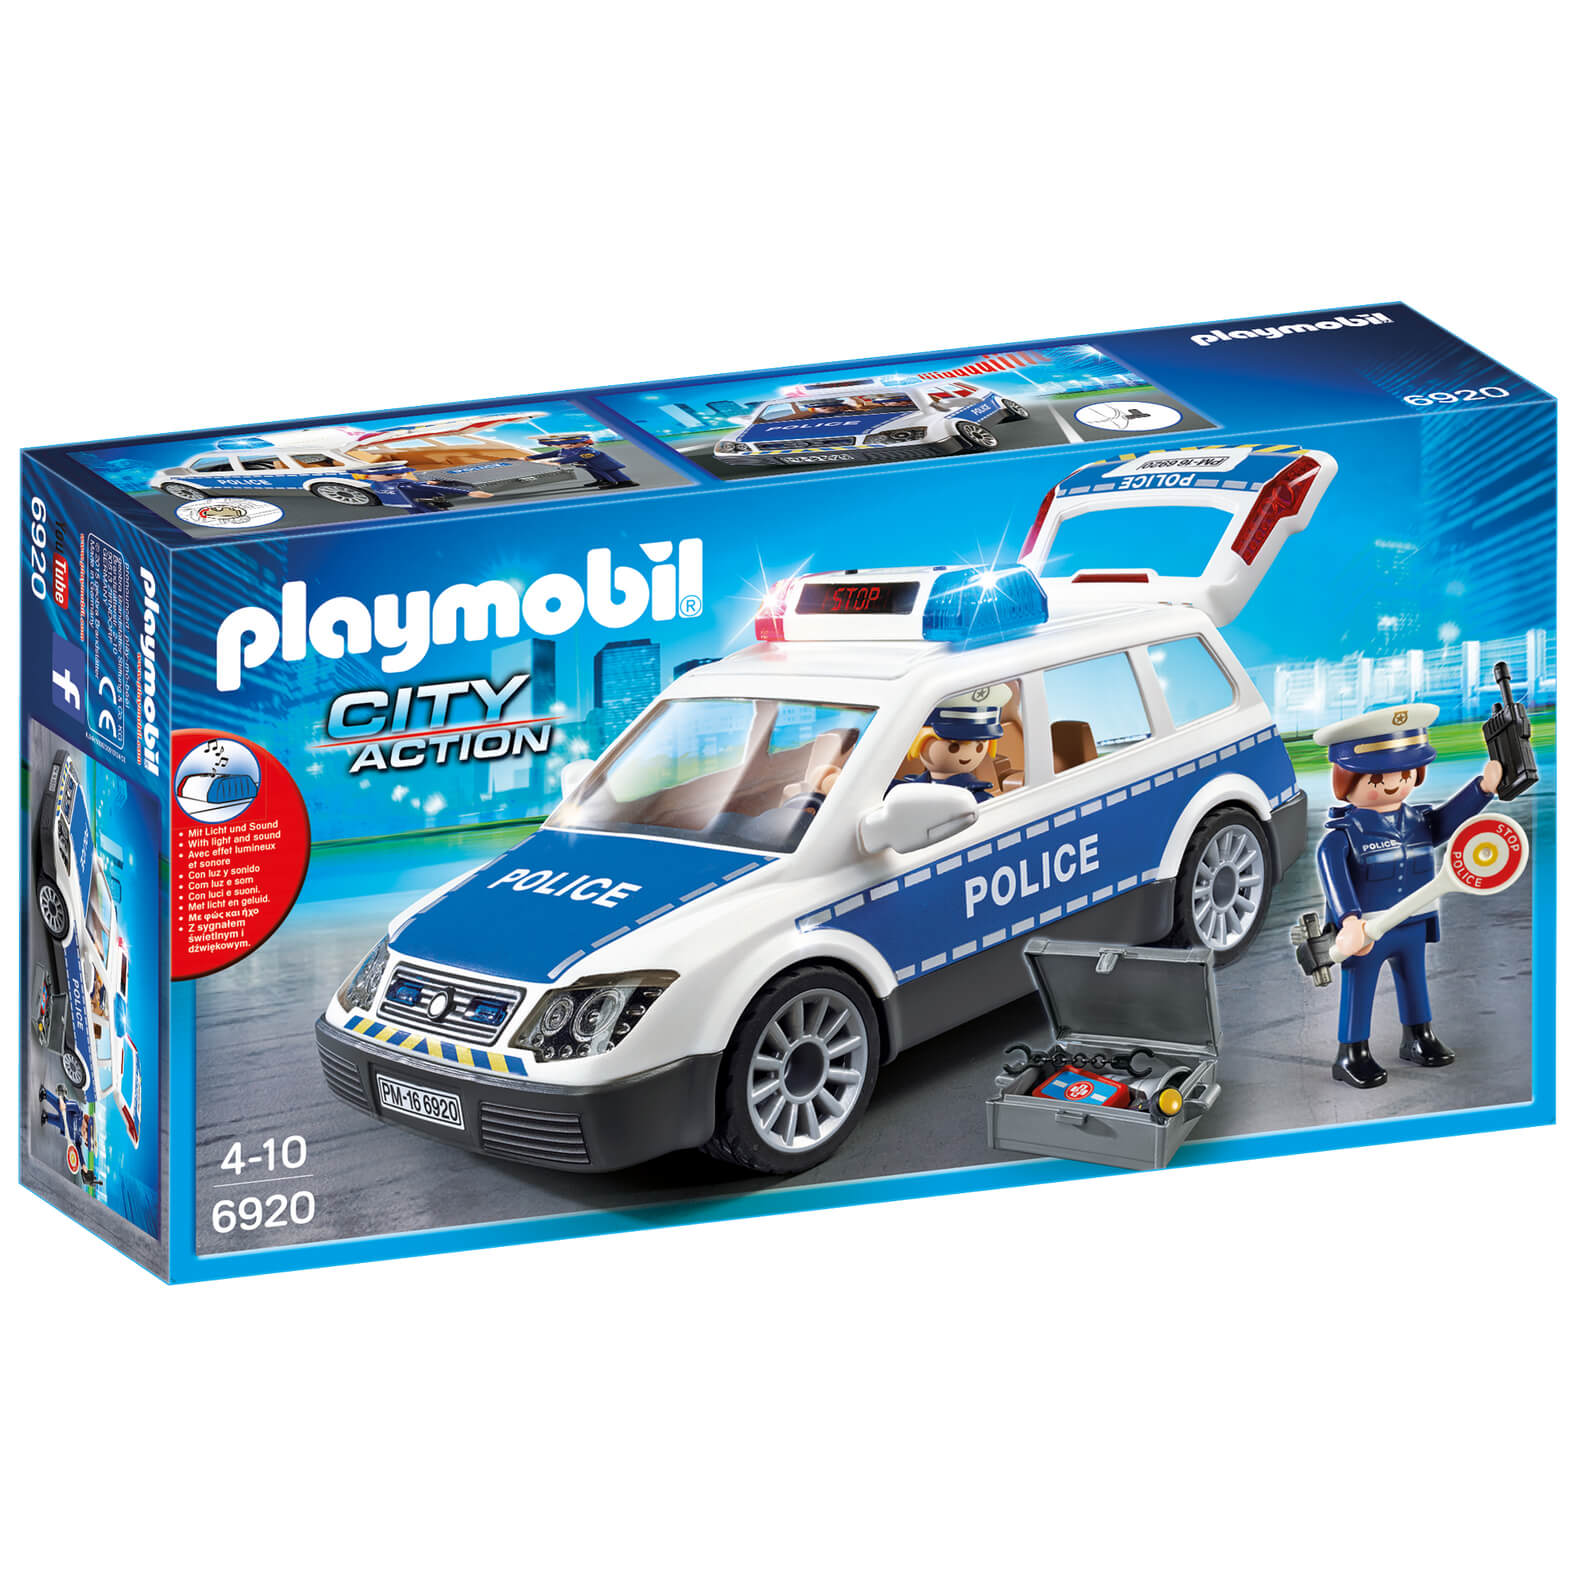 Playmobil City Action Squad Car With Lights And Sound (6920)